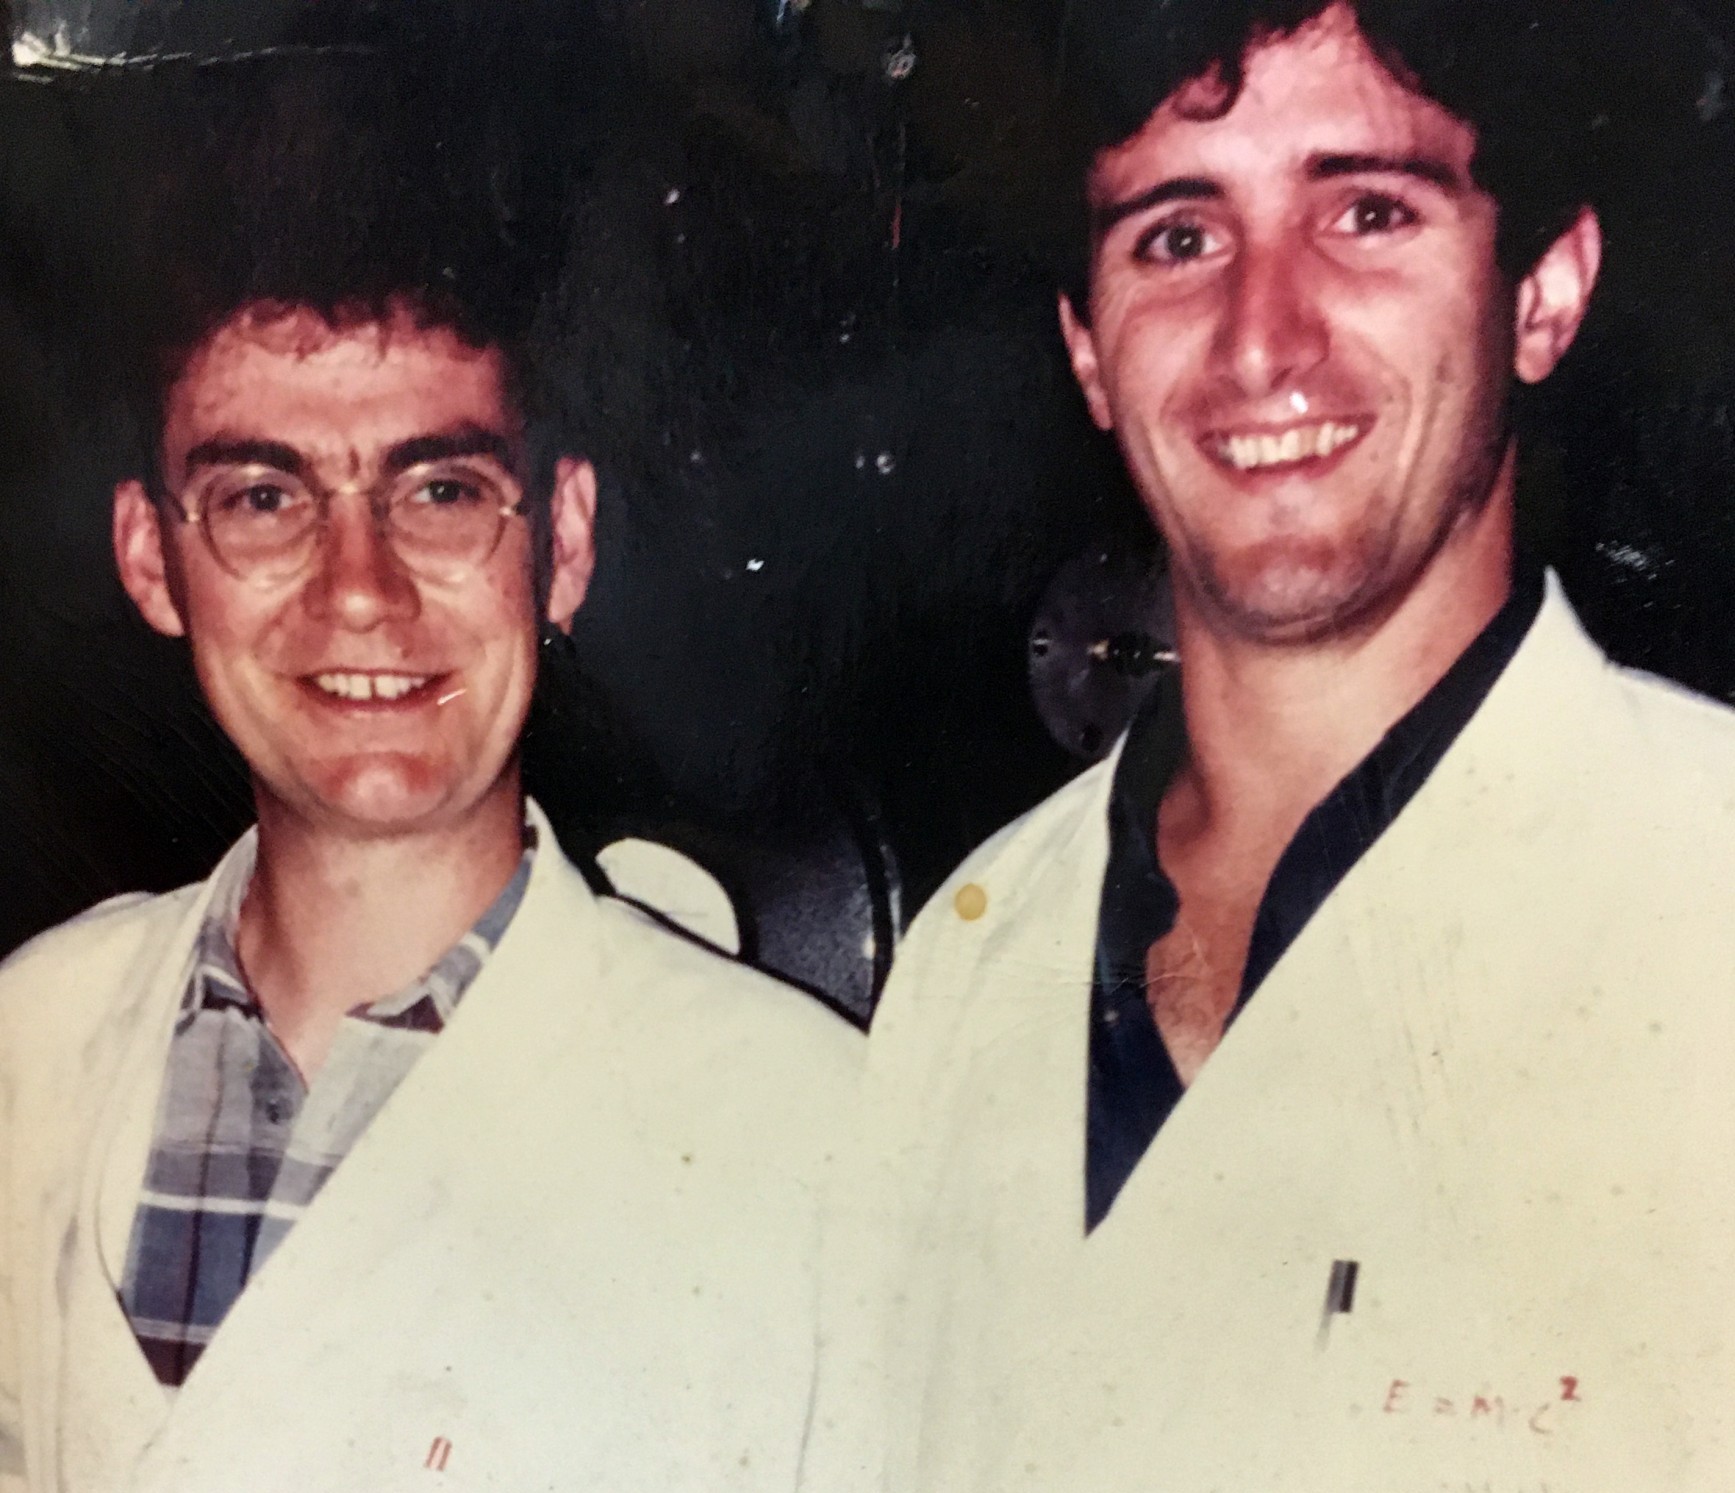 Terry Engelder and Chris Marone show off their science-y lab coats (1990).